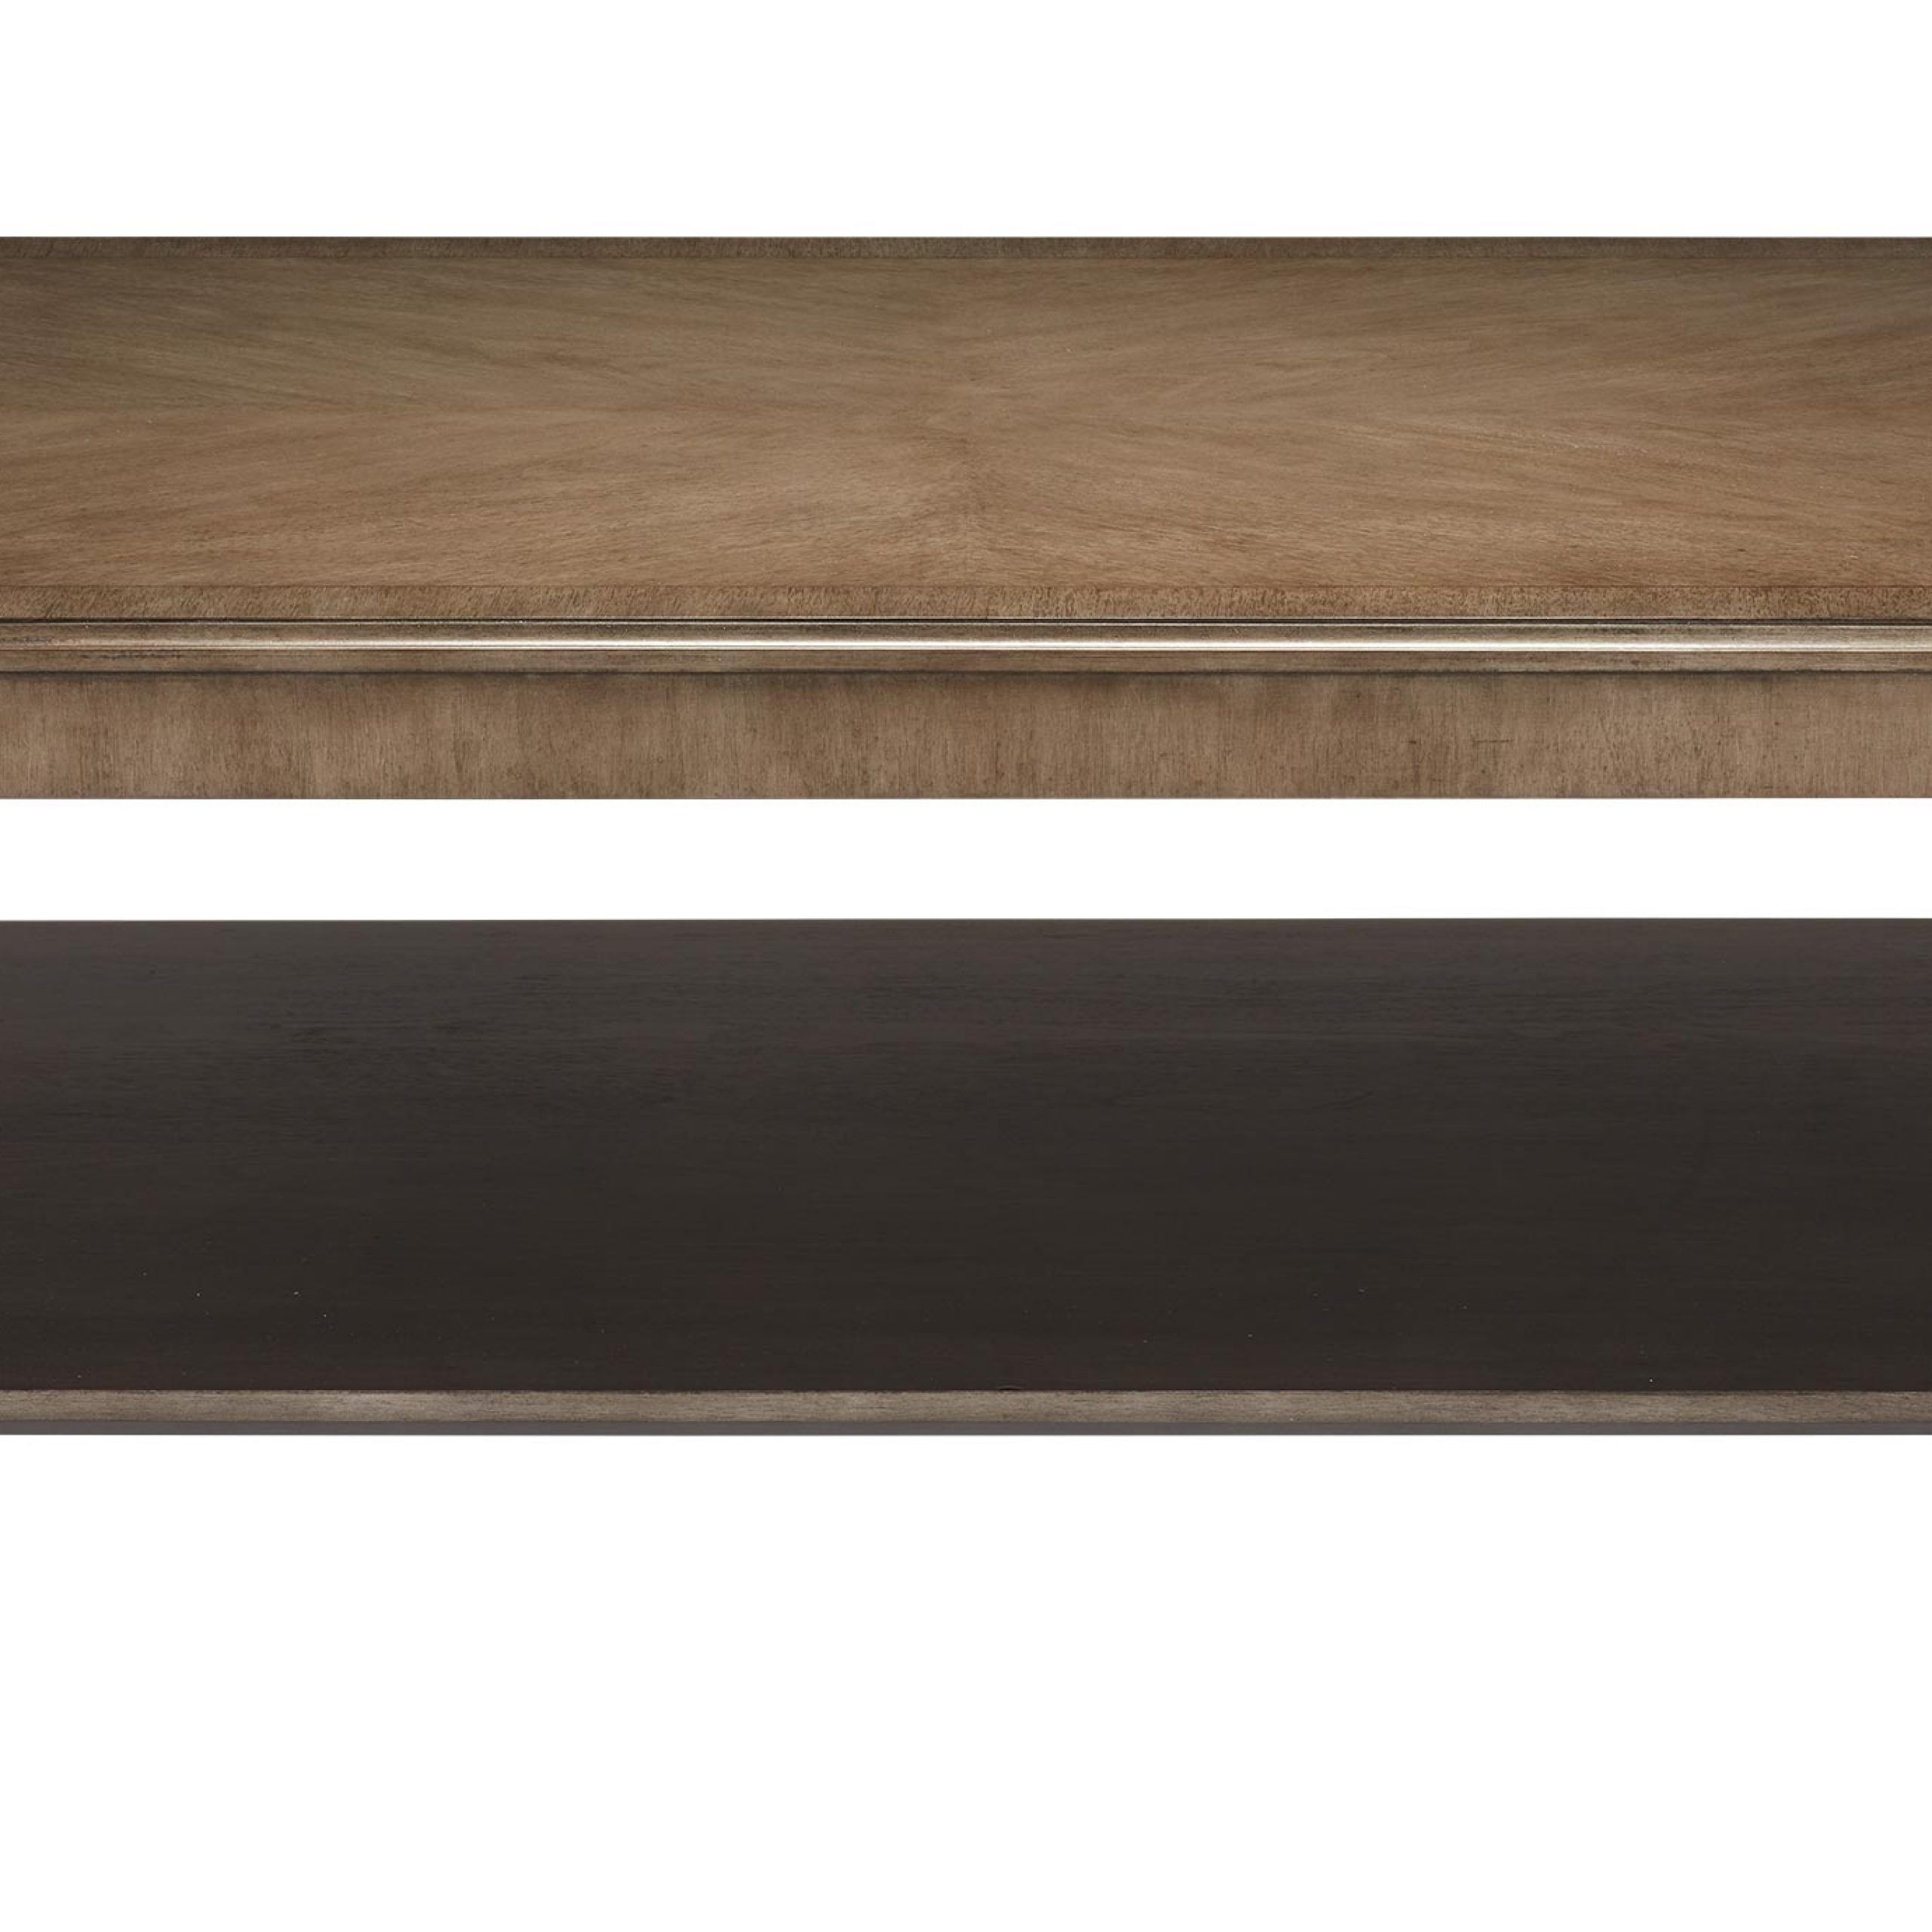 Elton Rectangular Coffee Table | Wood Coffee Table | Ethan Allen Inside Rectangle Coffee Tables (View 4 of 20)